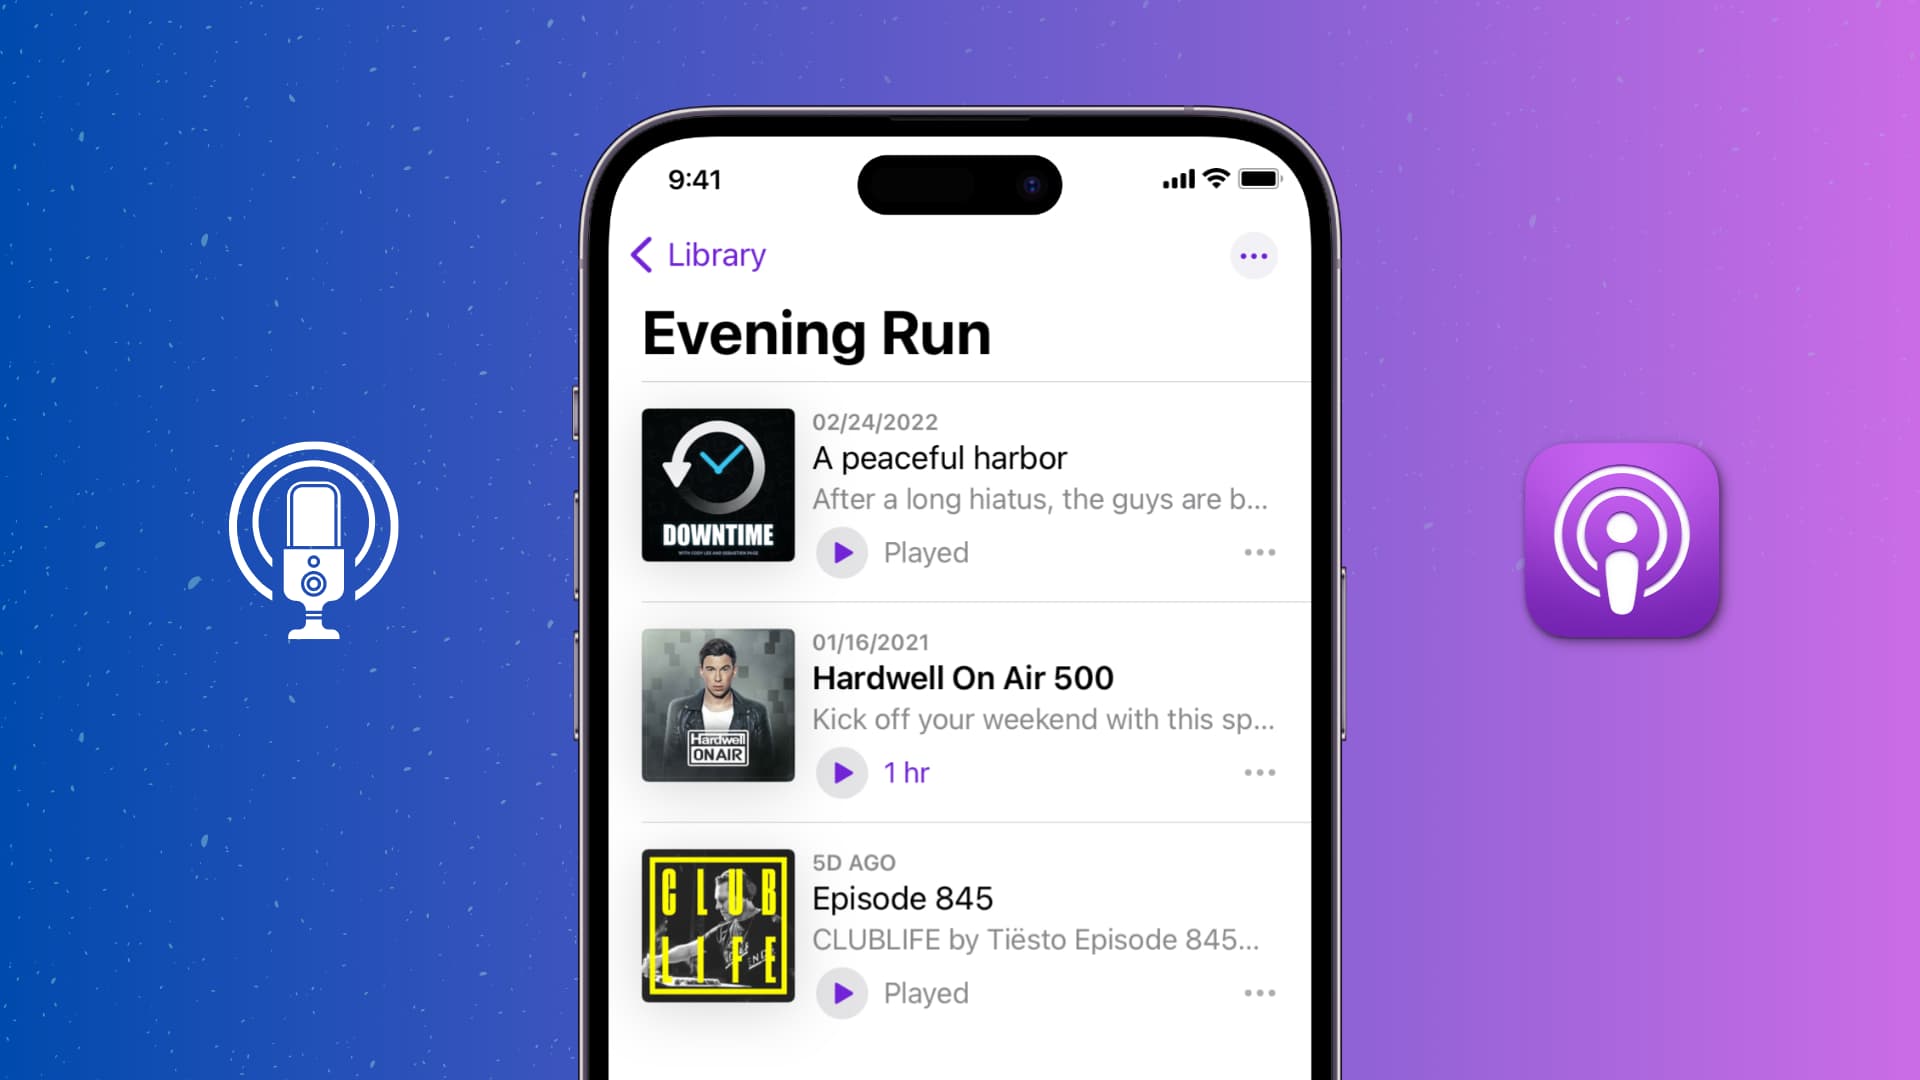 Station in the Apple Podcasts app on iPhone